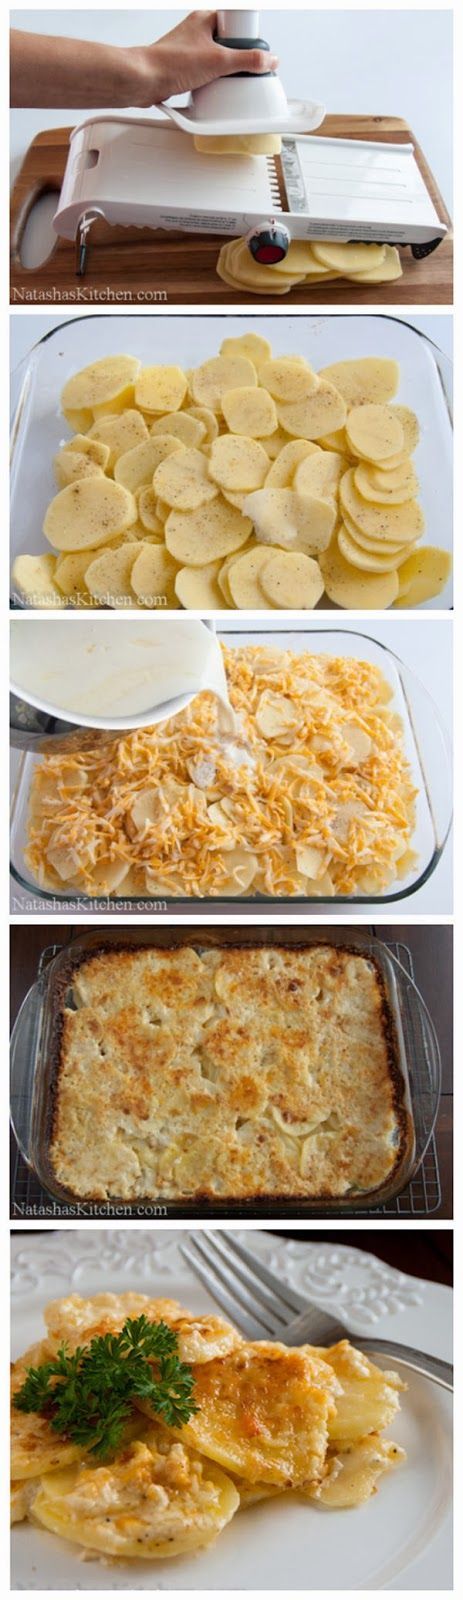 Best Scalloped Potatoes Recipe EVER!! UPDATE: Best potatoes you can make! Have made it over and over again